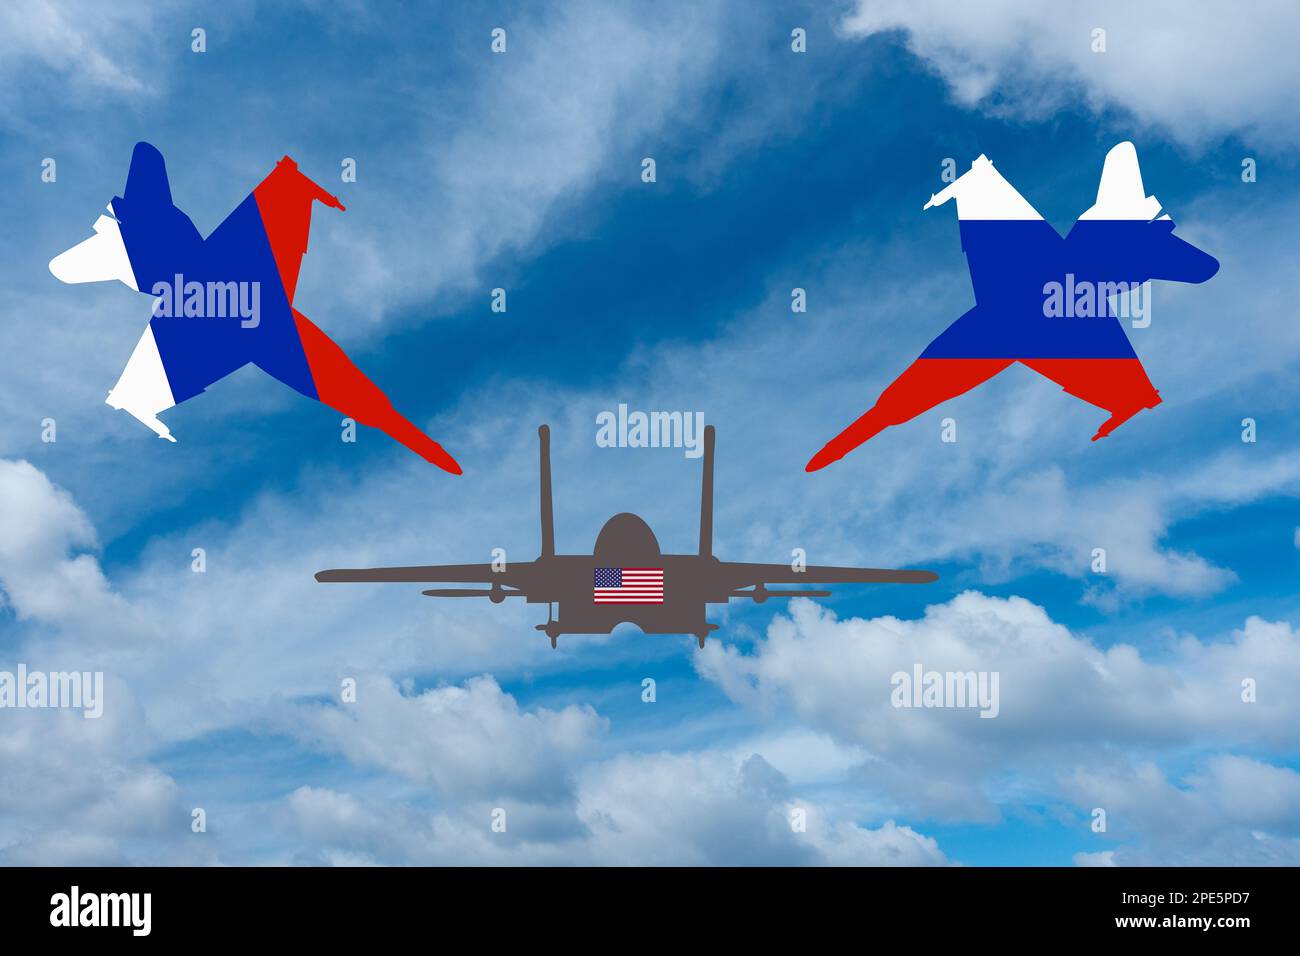 Fighter jets in Russian flag colours flying close to drone with USA flag. Russia, USA, Cold War, Black Sea, attack, attacking...concept Stock Photo